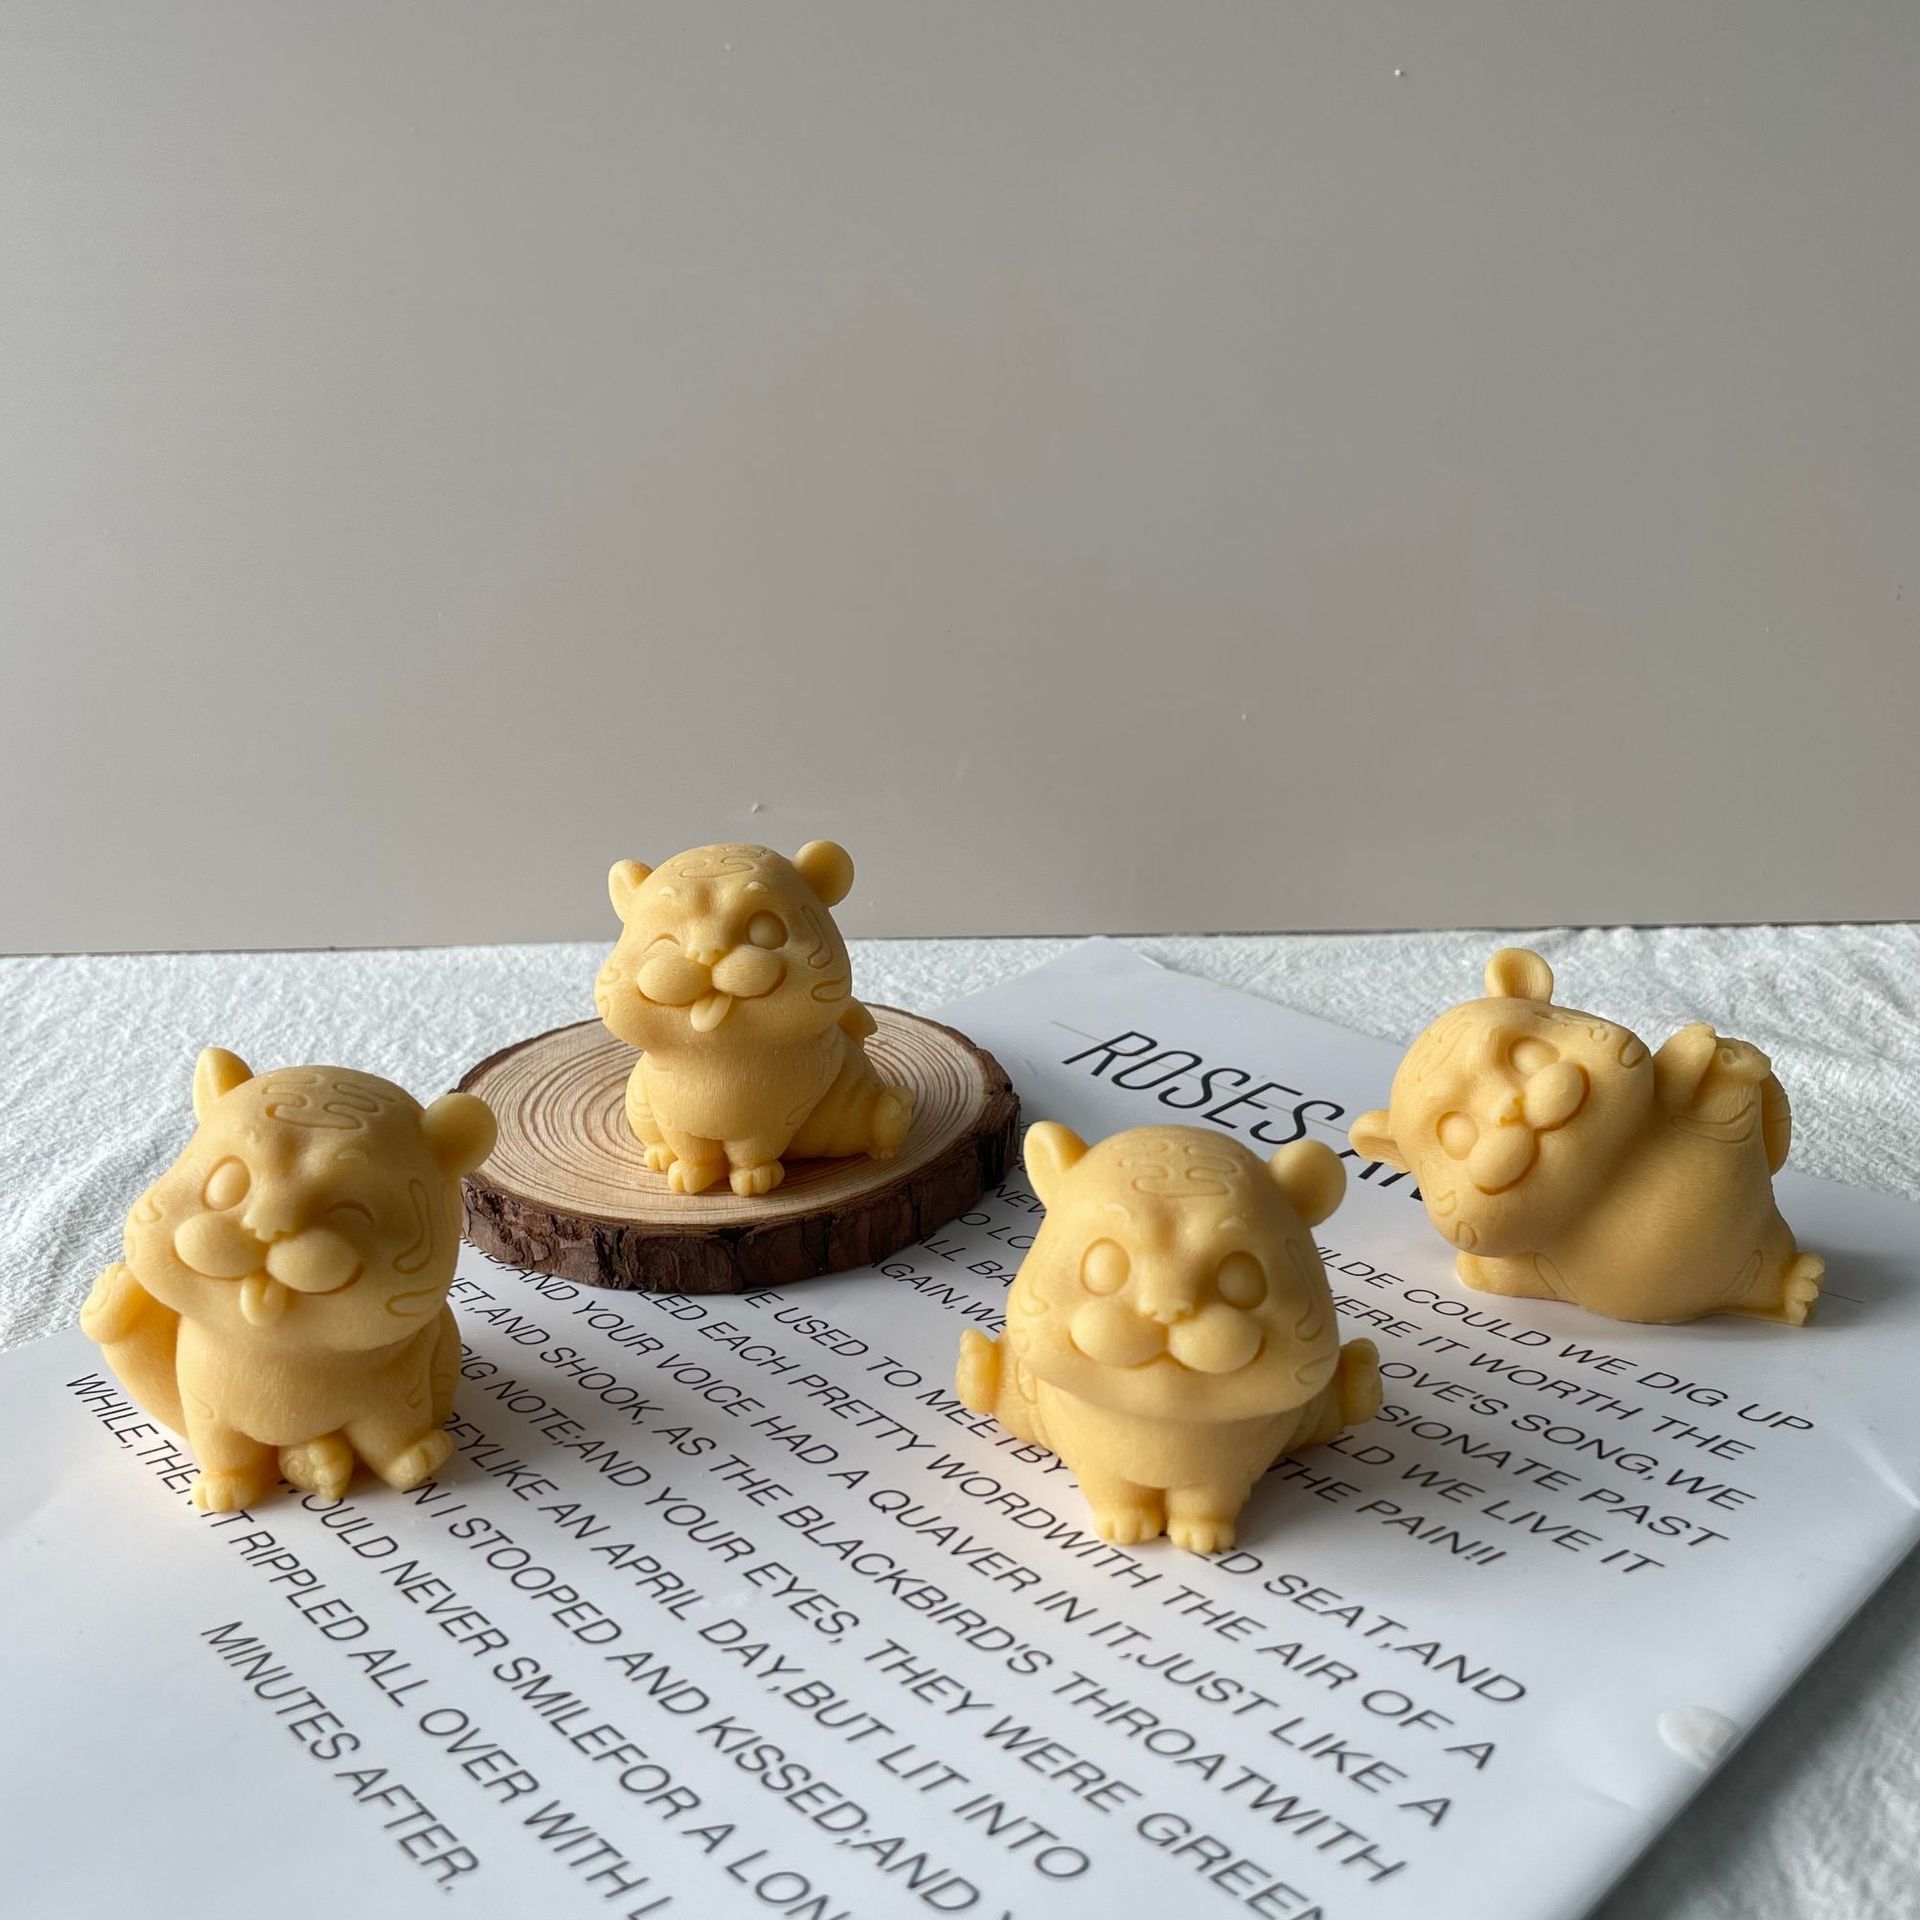 J6-96 2022 Nij ûntwerp Cute Tiger Silicone Soap Mold DIY Gips Ornaments Making Mould 3D Tiger Silicone Candle Mold